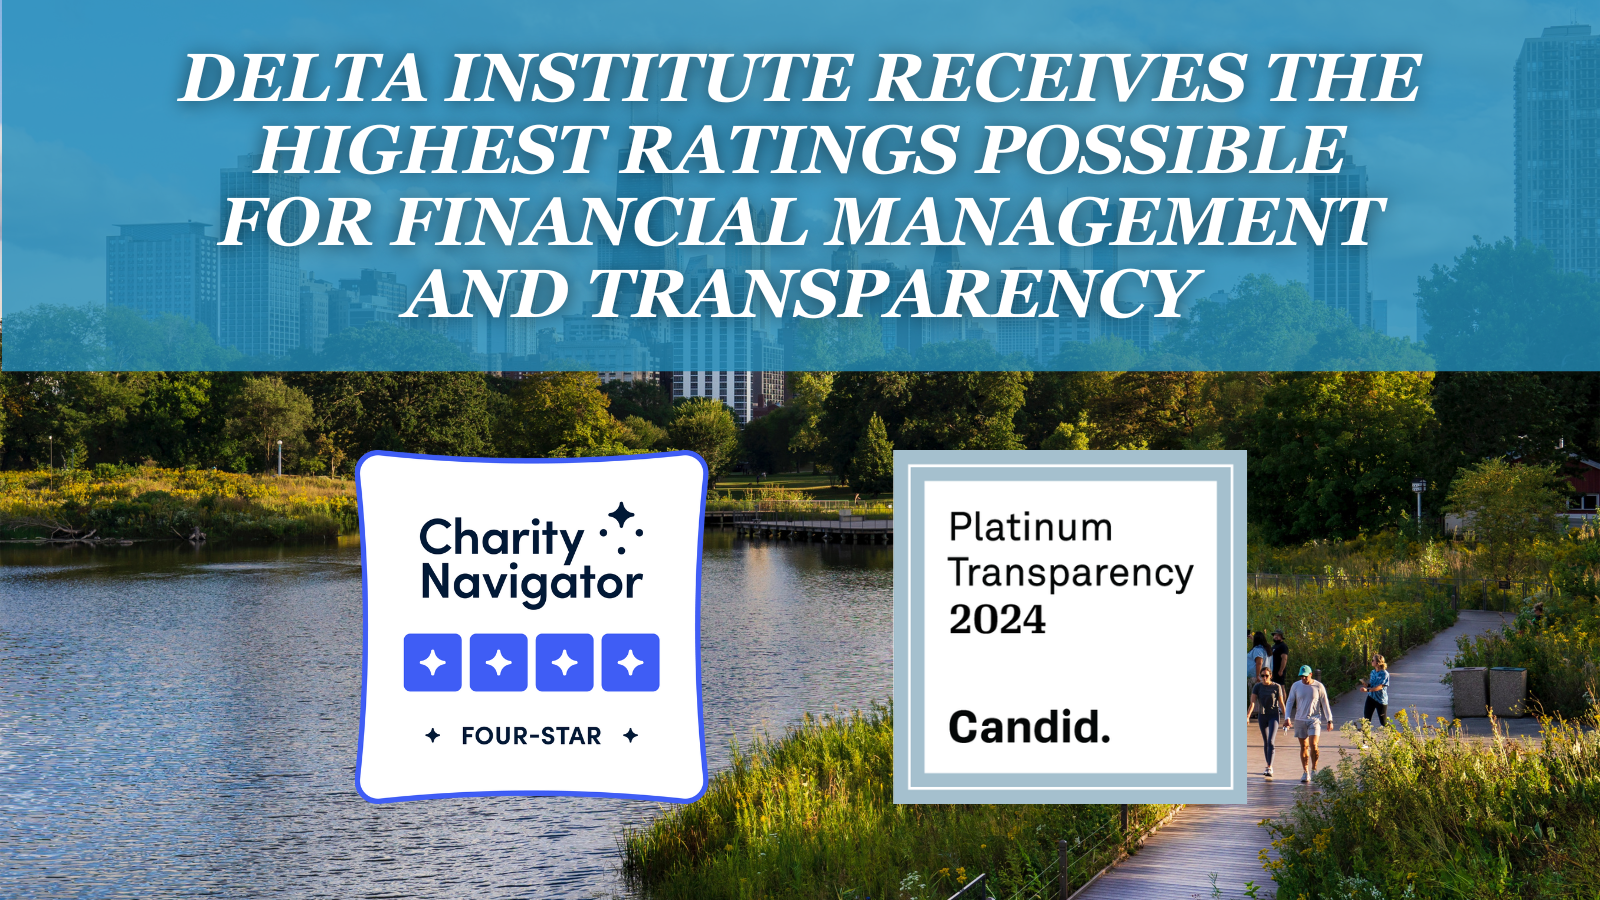 delta institute receives the highest ratings possible for financial management and transparency: Charity Navigator Four Star; Candid. Platinum Transparency Seal 